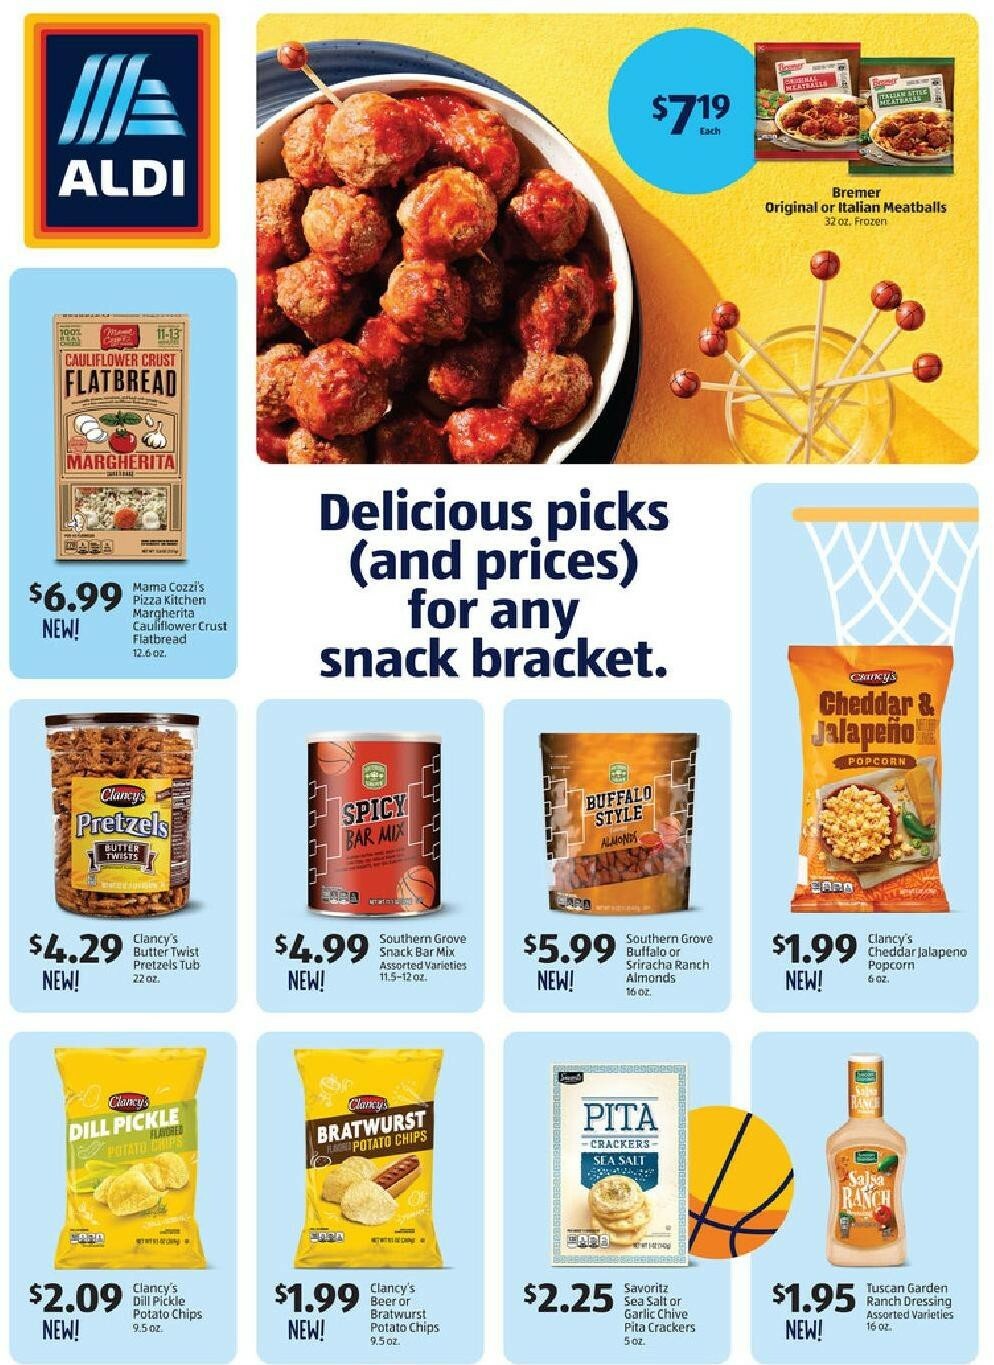 ALDI Weekly Ad from March 12